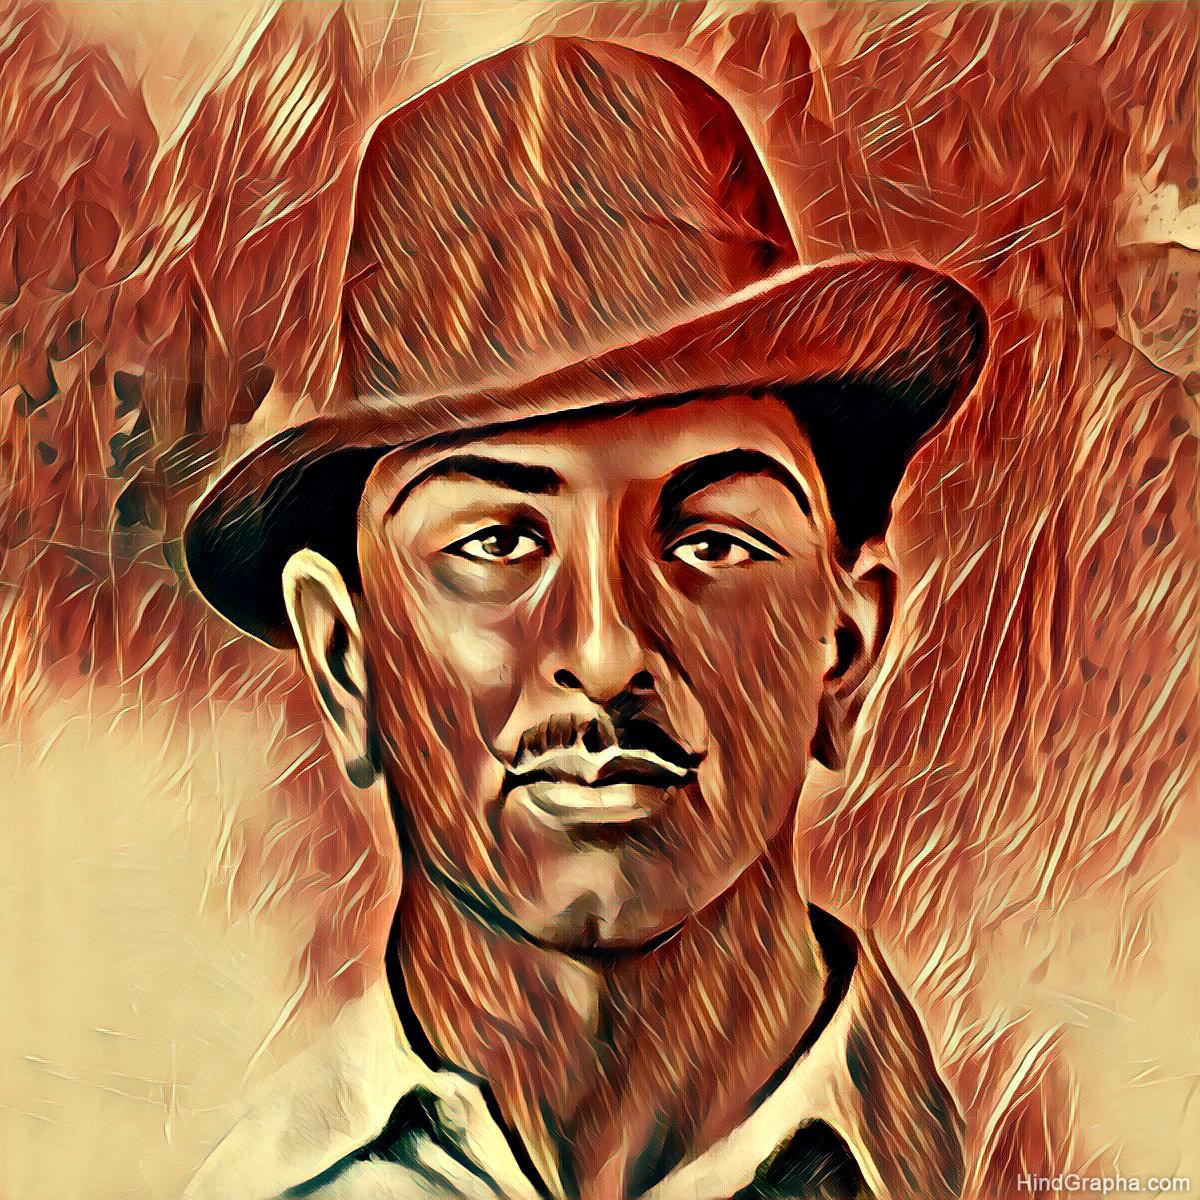 12 Bhagat Singh Photos In Hd Quality - Bhagat Singh Hd Wallpapers Download  - 1200x1200 Wallpaper 